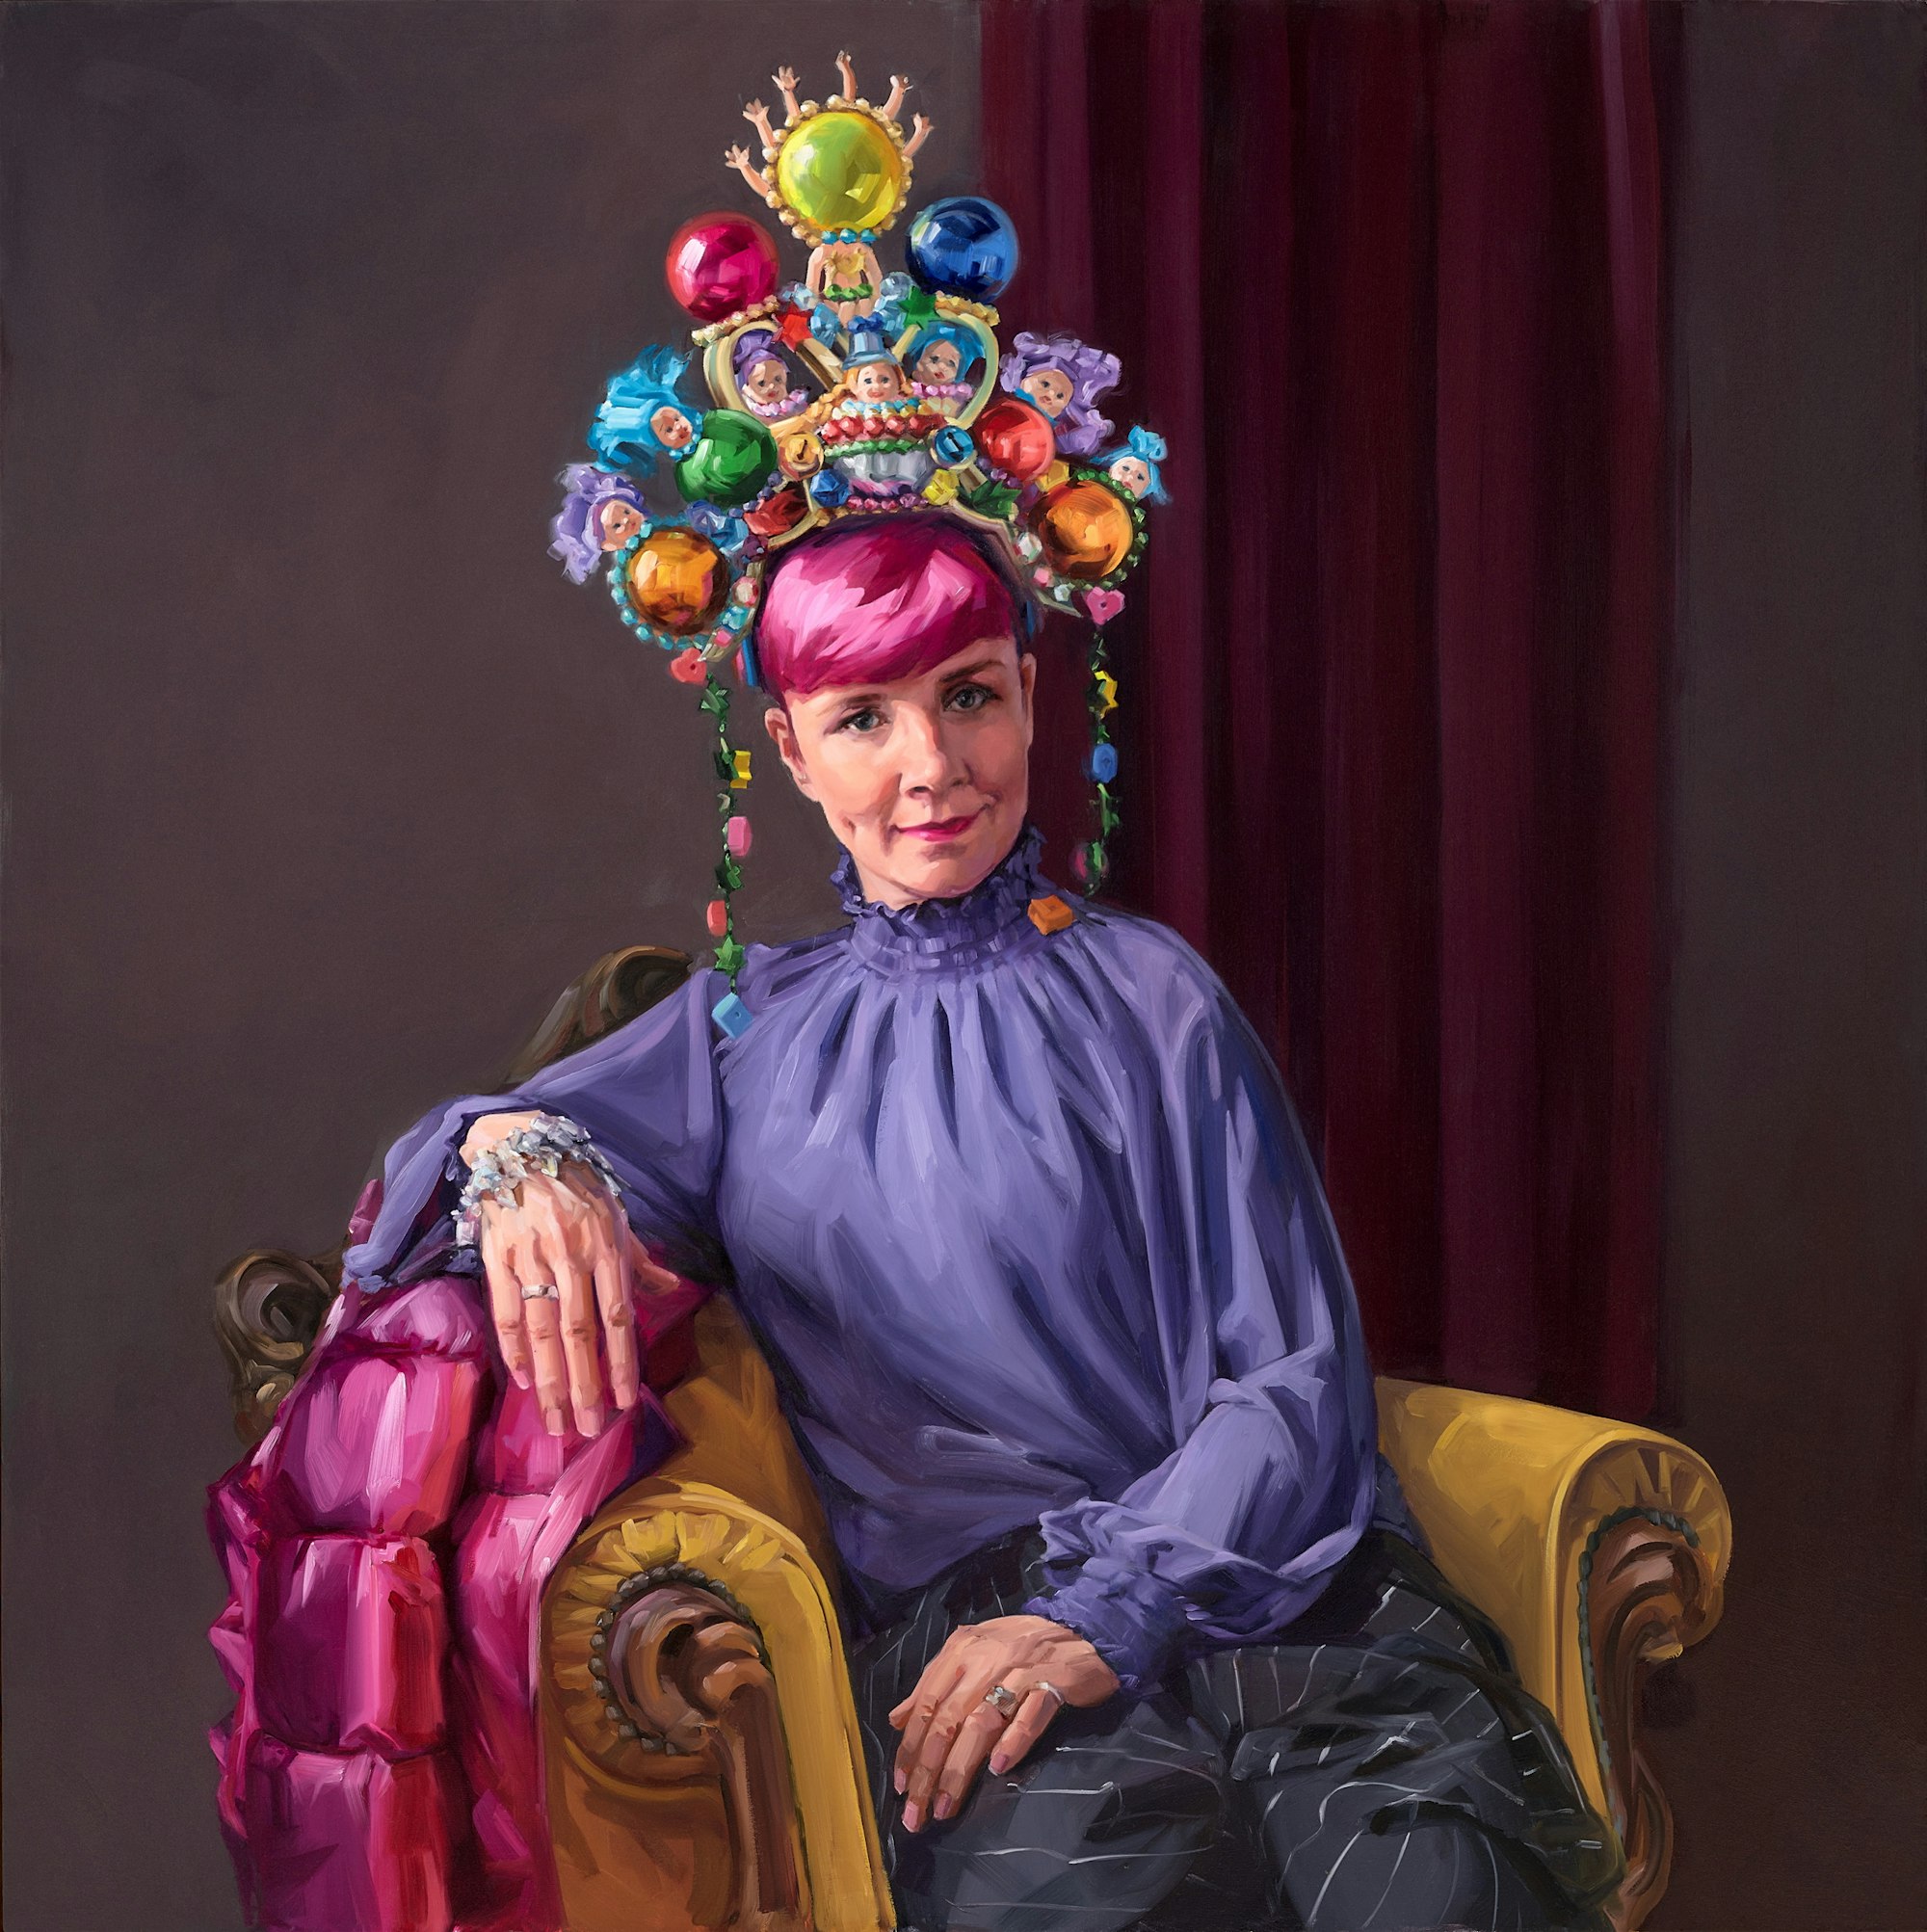 A person with pink hair in a high-necked purple outfit wearing a large colourful headpiece sits in an armchair